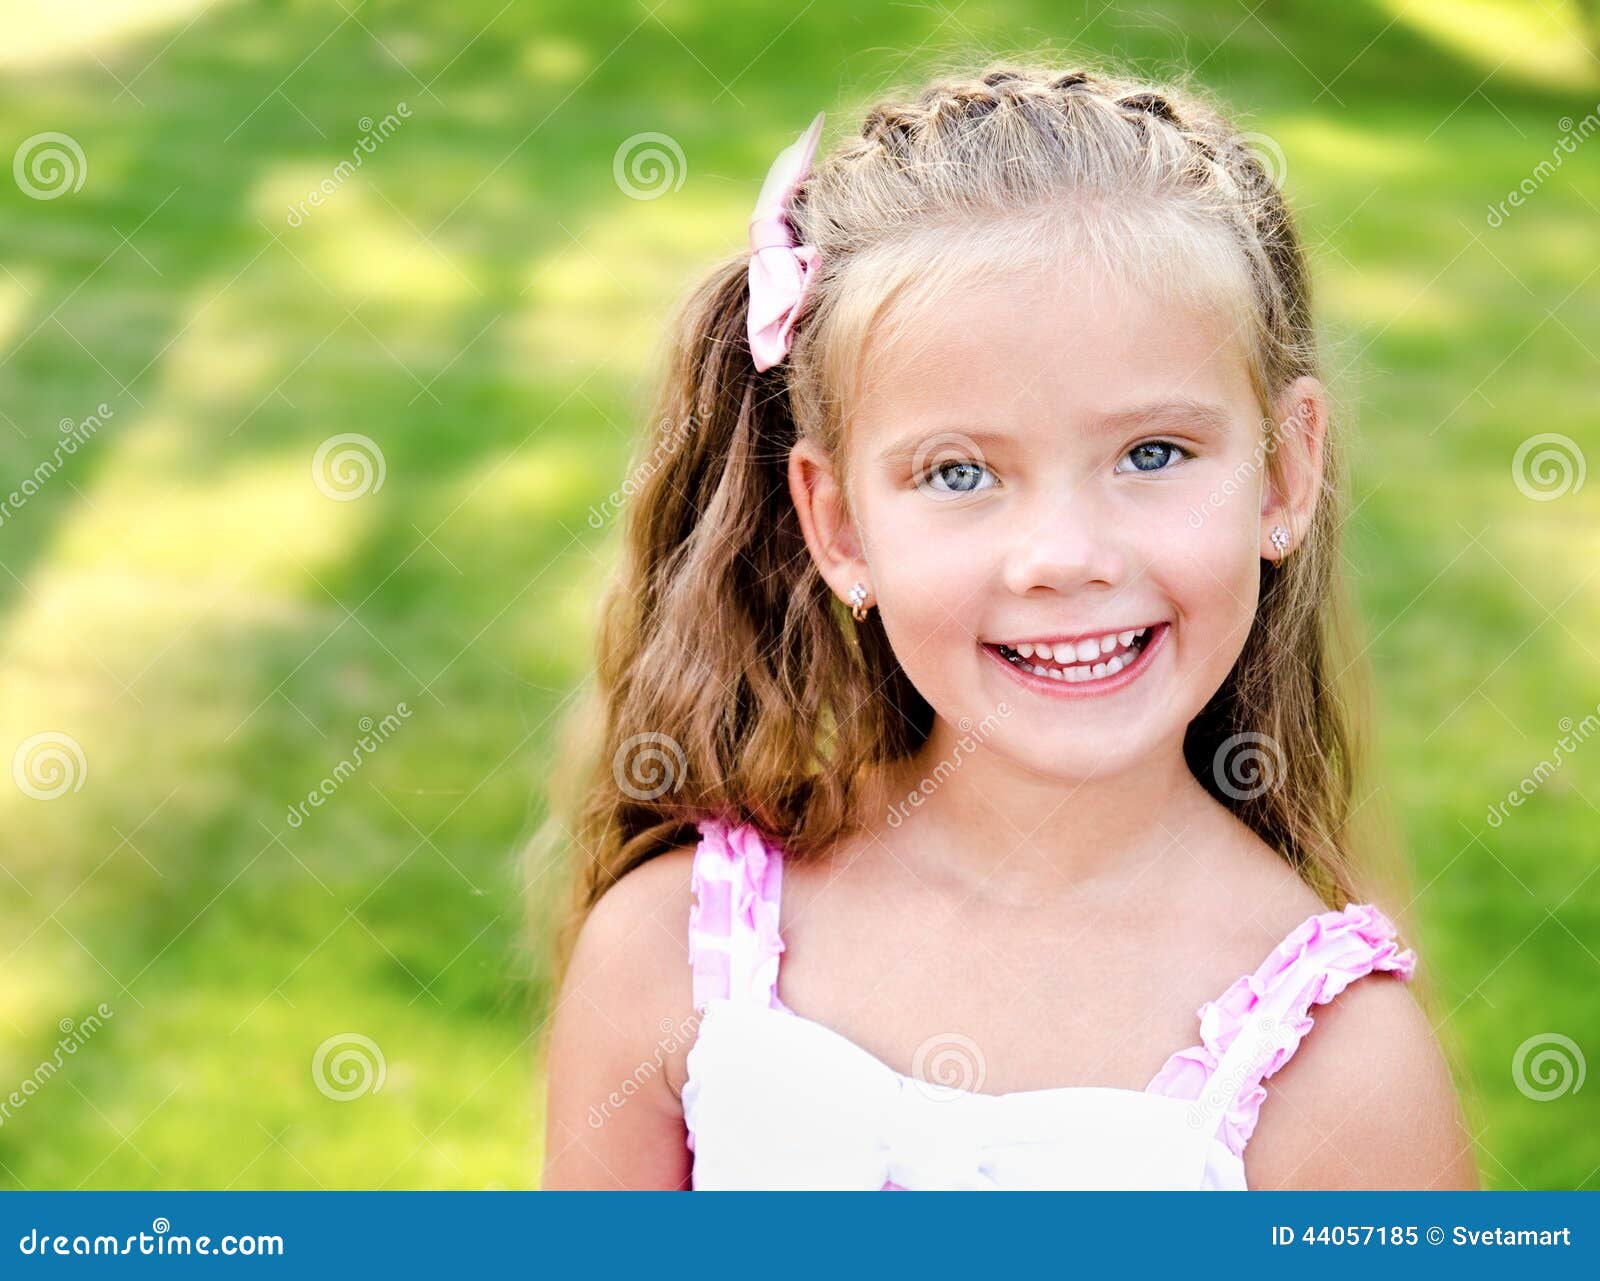 Portrait of Adorable Smiling Little Girl in the Park Stock Image ...